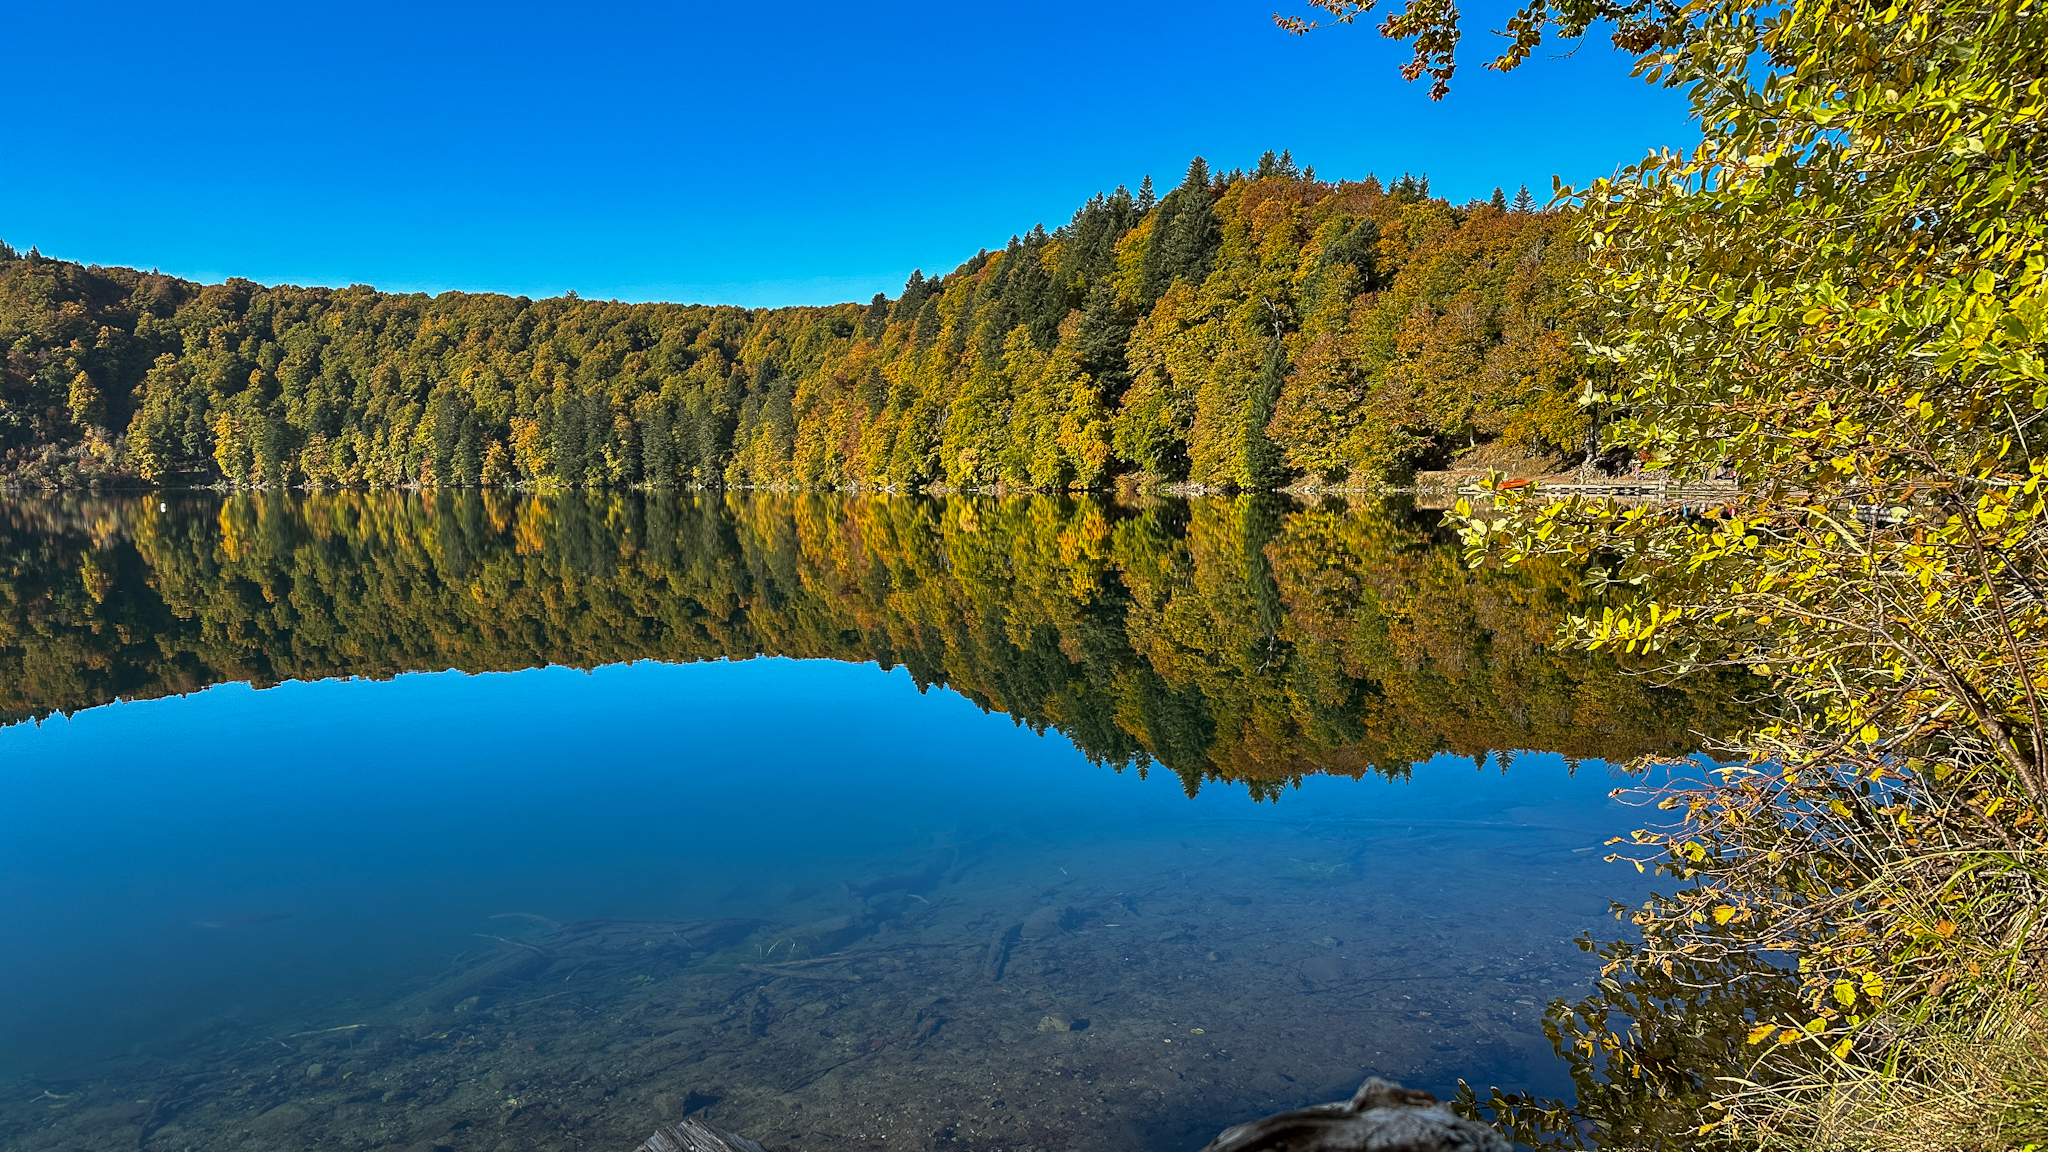 Magnificent reflections on the waters of Lac Pavin